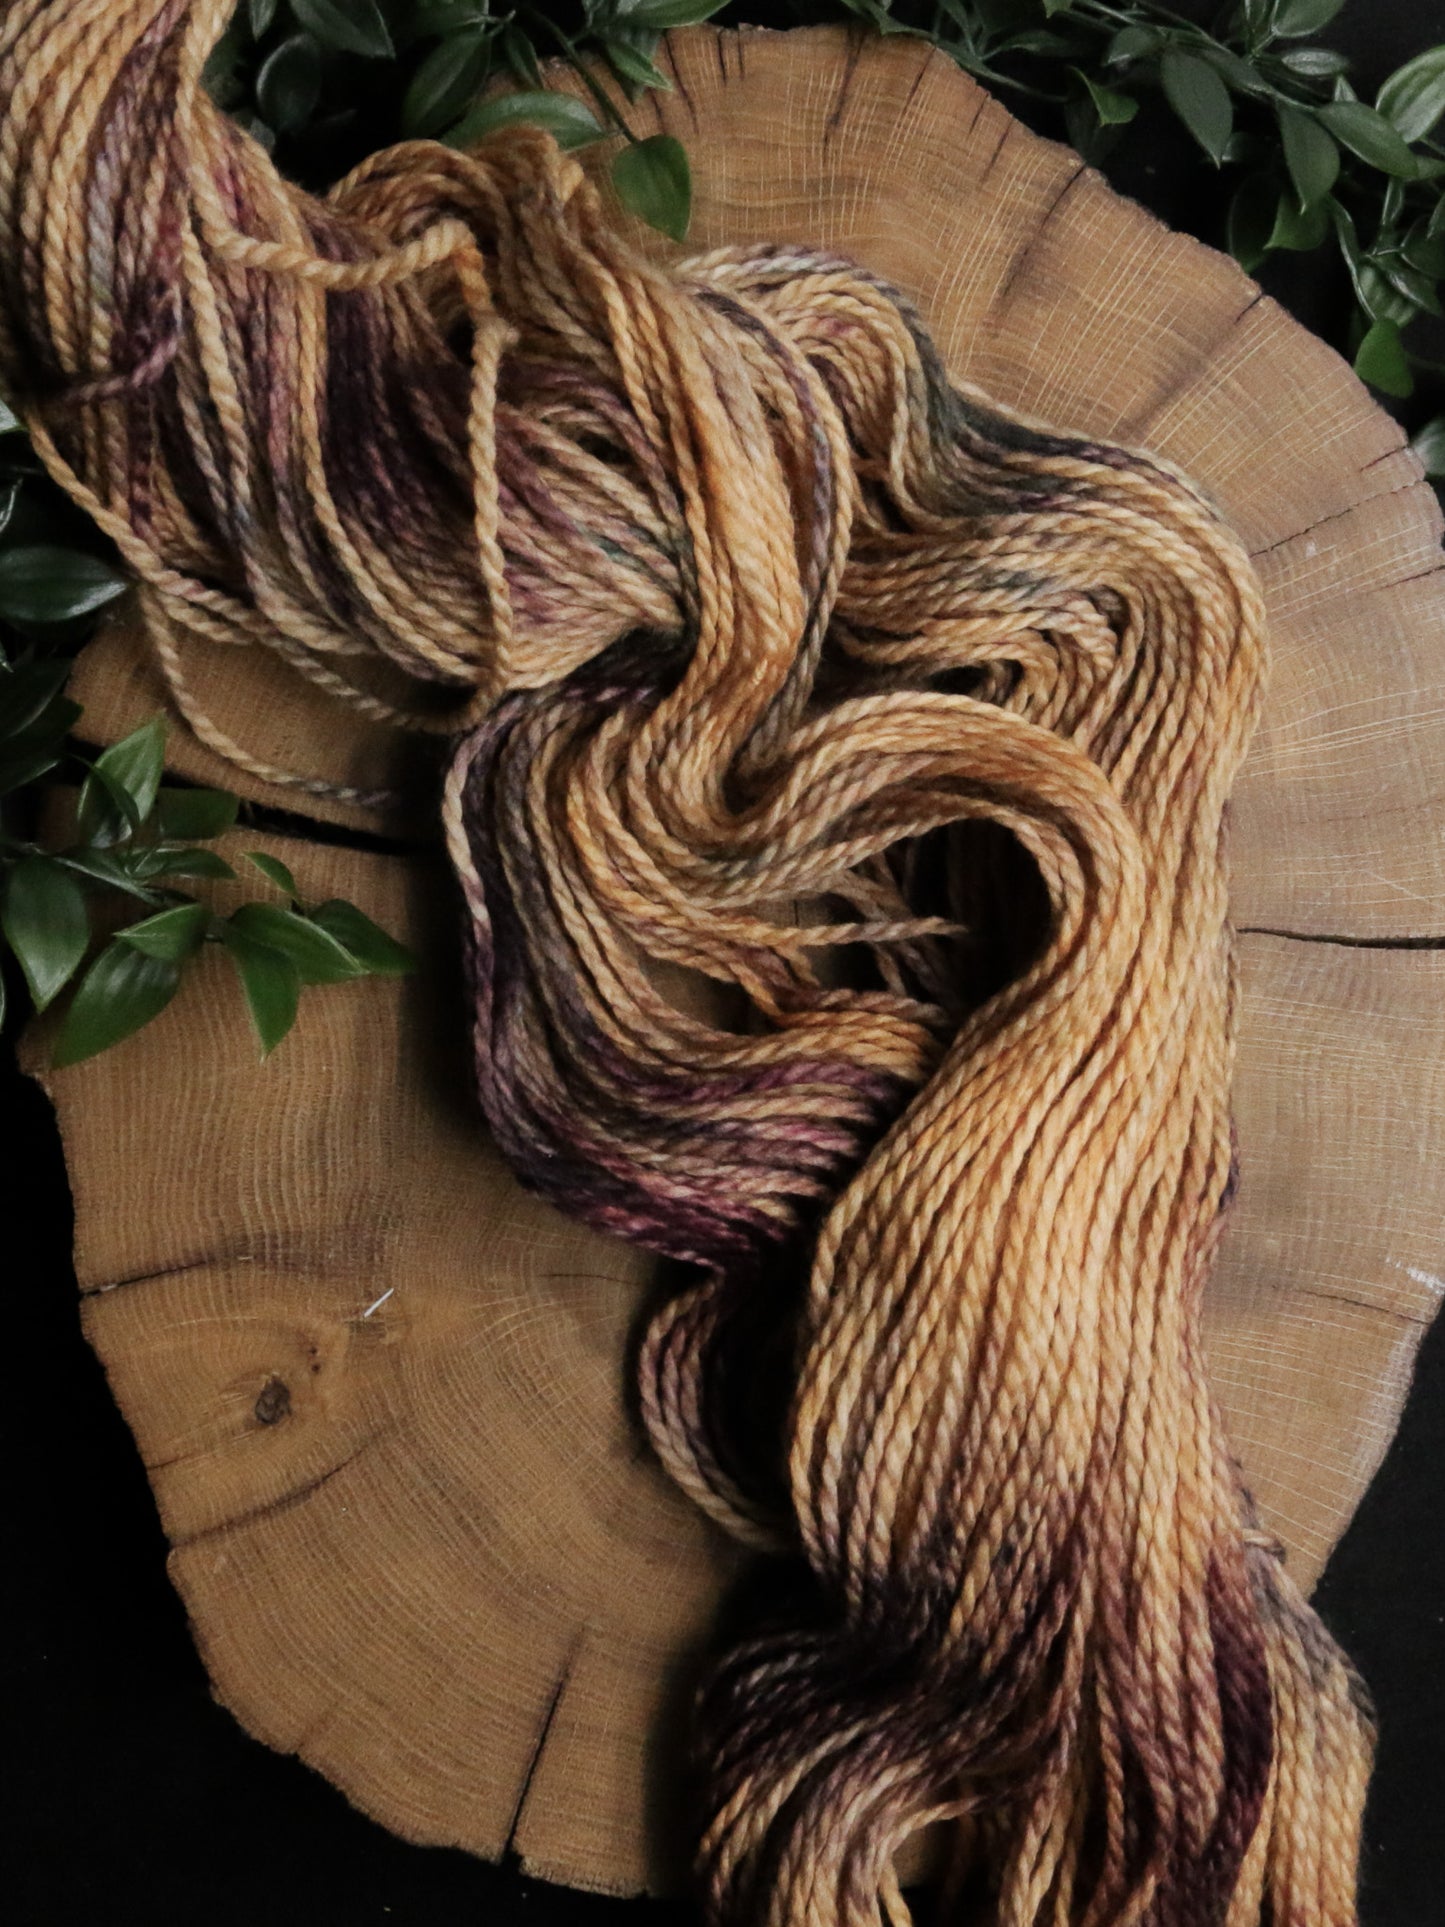 One of a Kind - Trial Base BFL 2-ply - Bulky Weight